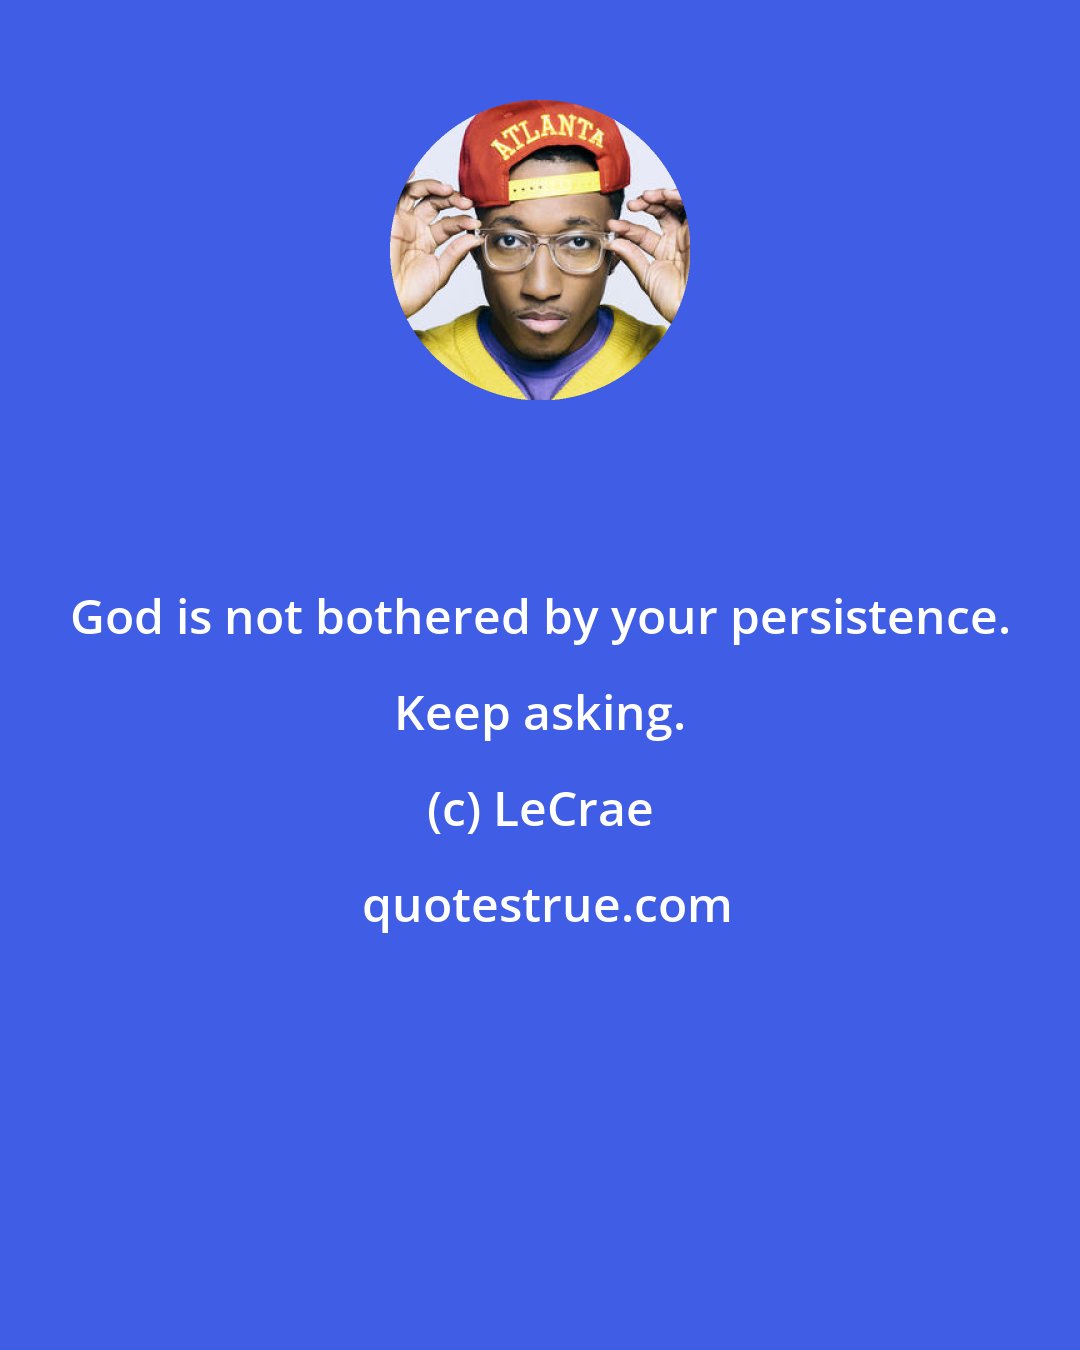 LeCrae: God is not bothered by your persistence. Keep asking.